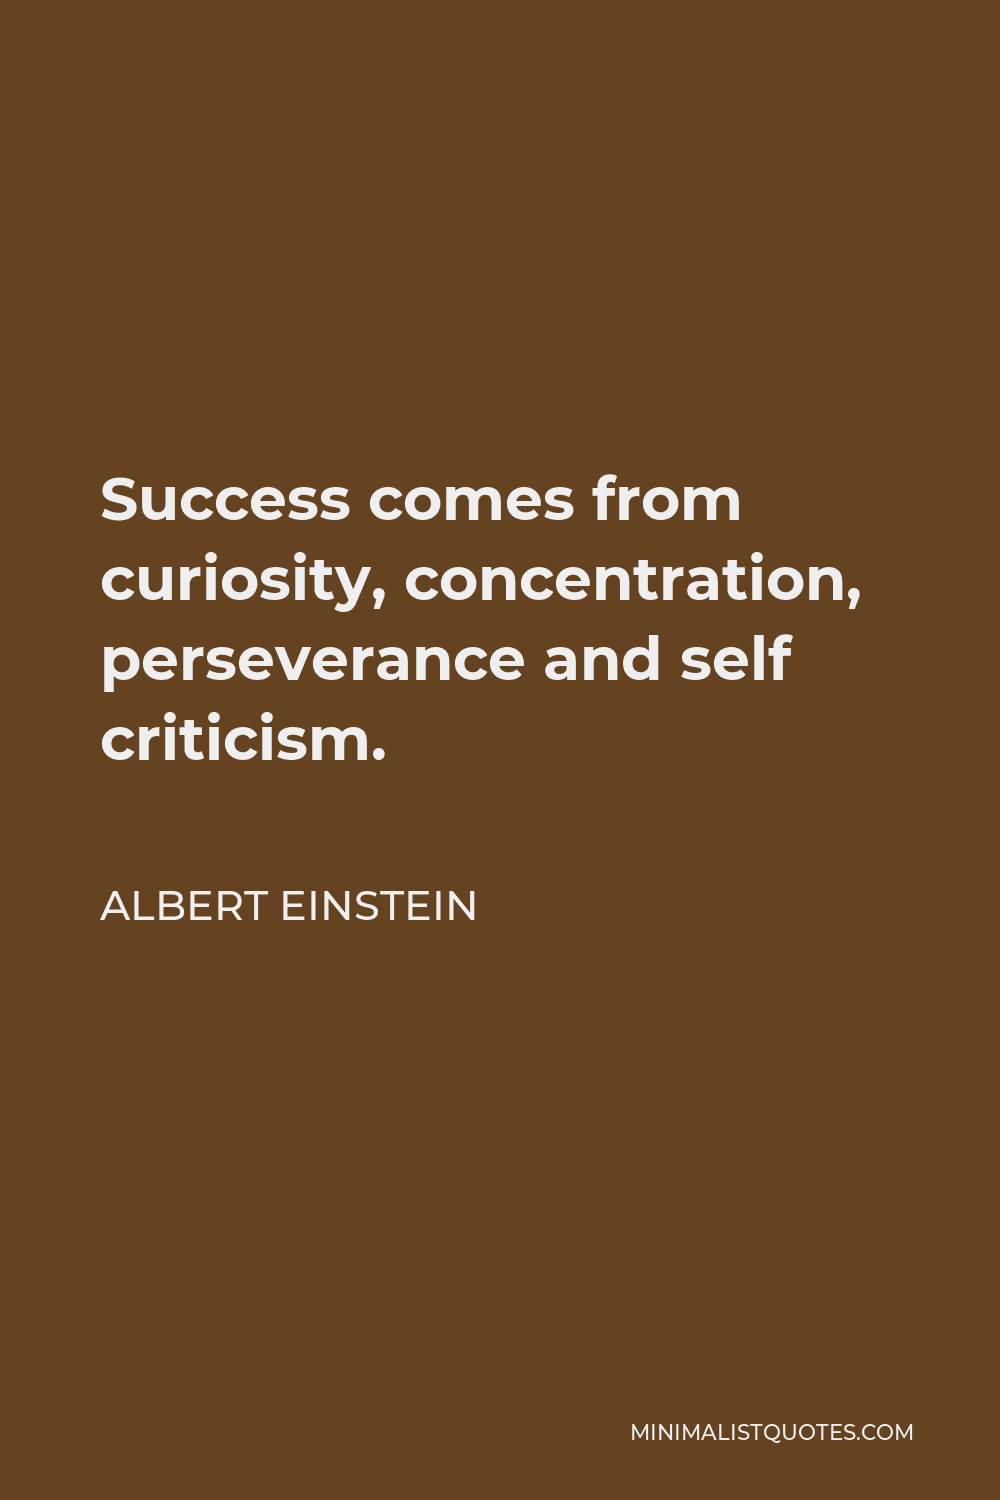 Albert Einstein Quote - Success comes from curiosity, concentration, perseverance and self criticism.